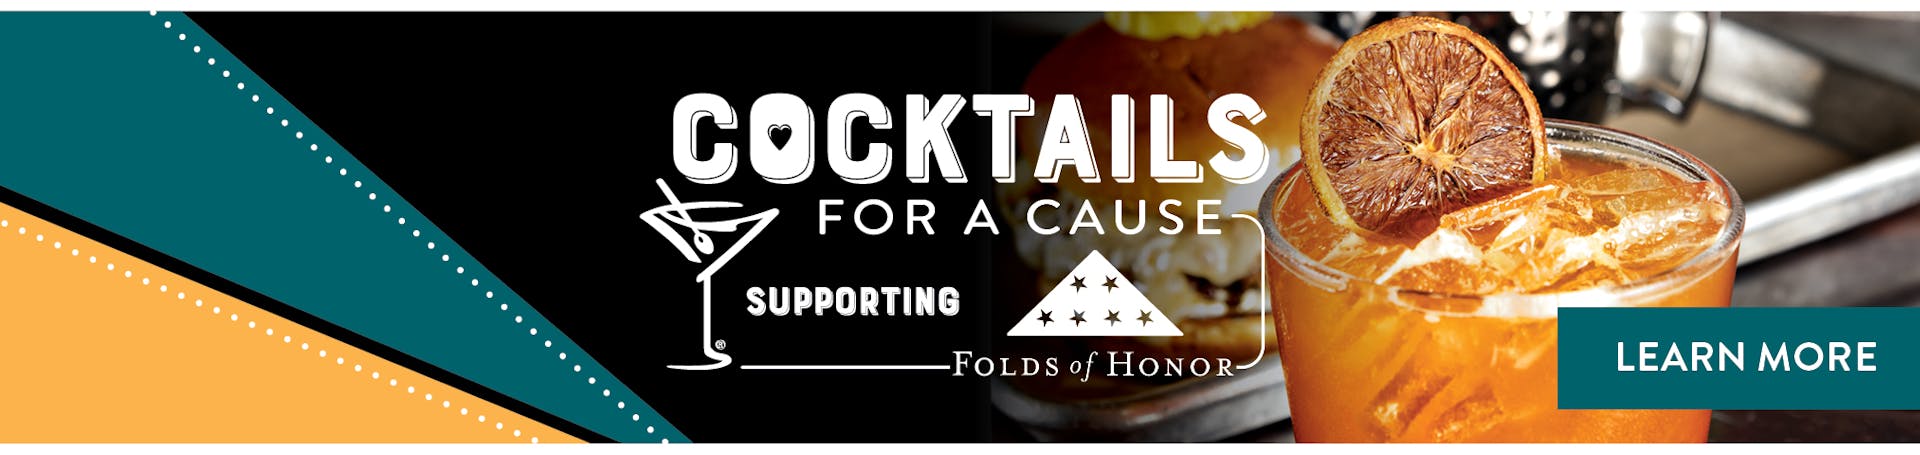 Cocktails for a cause. Supporting folds of honor. Image of NEW cocktail, the blood orange snowbird, and a burger in the background.